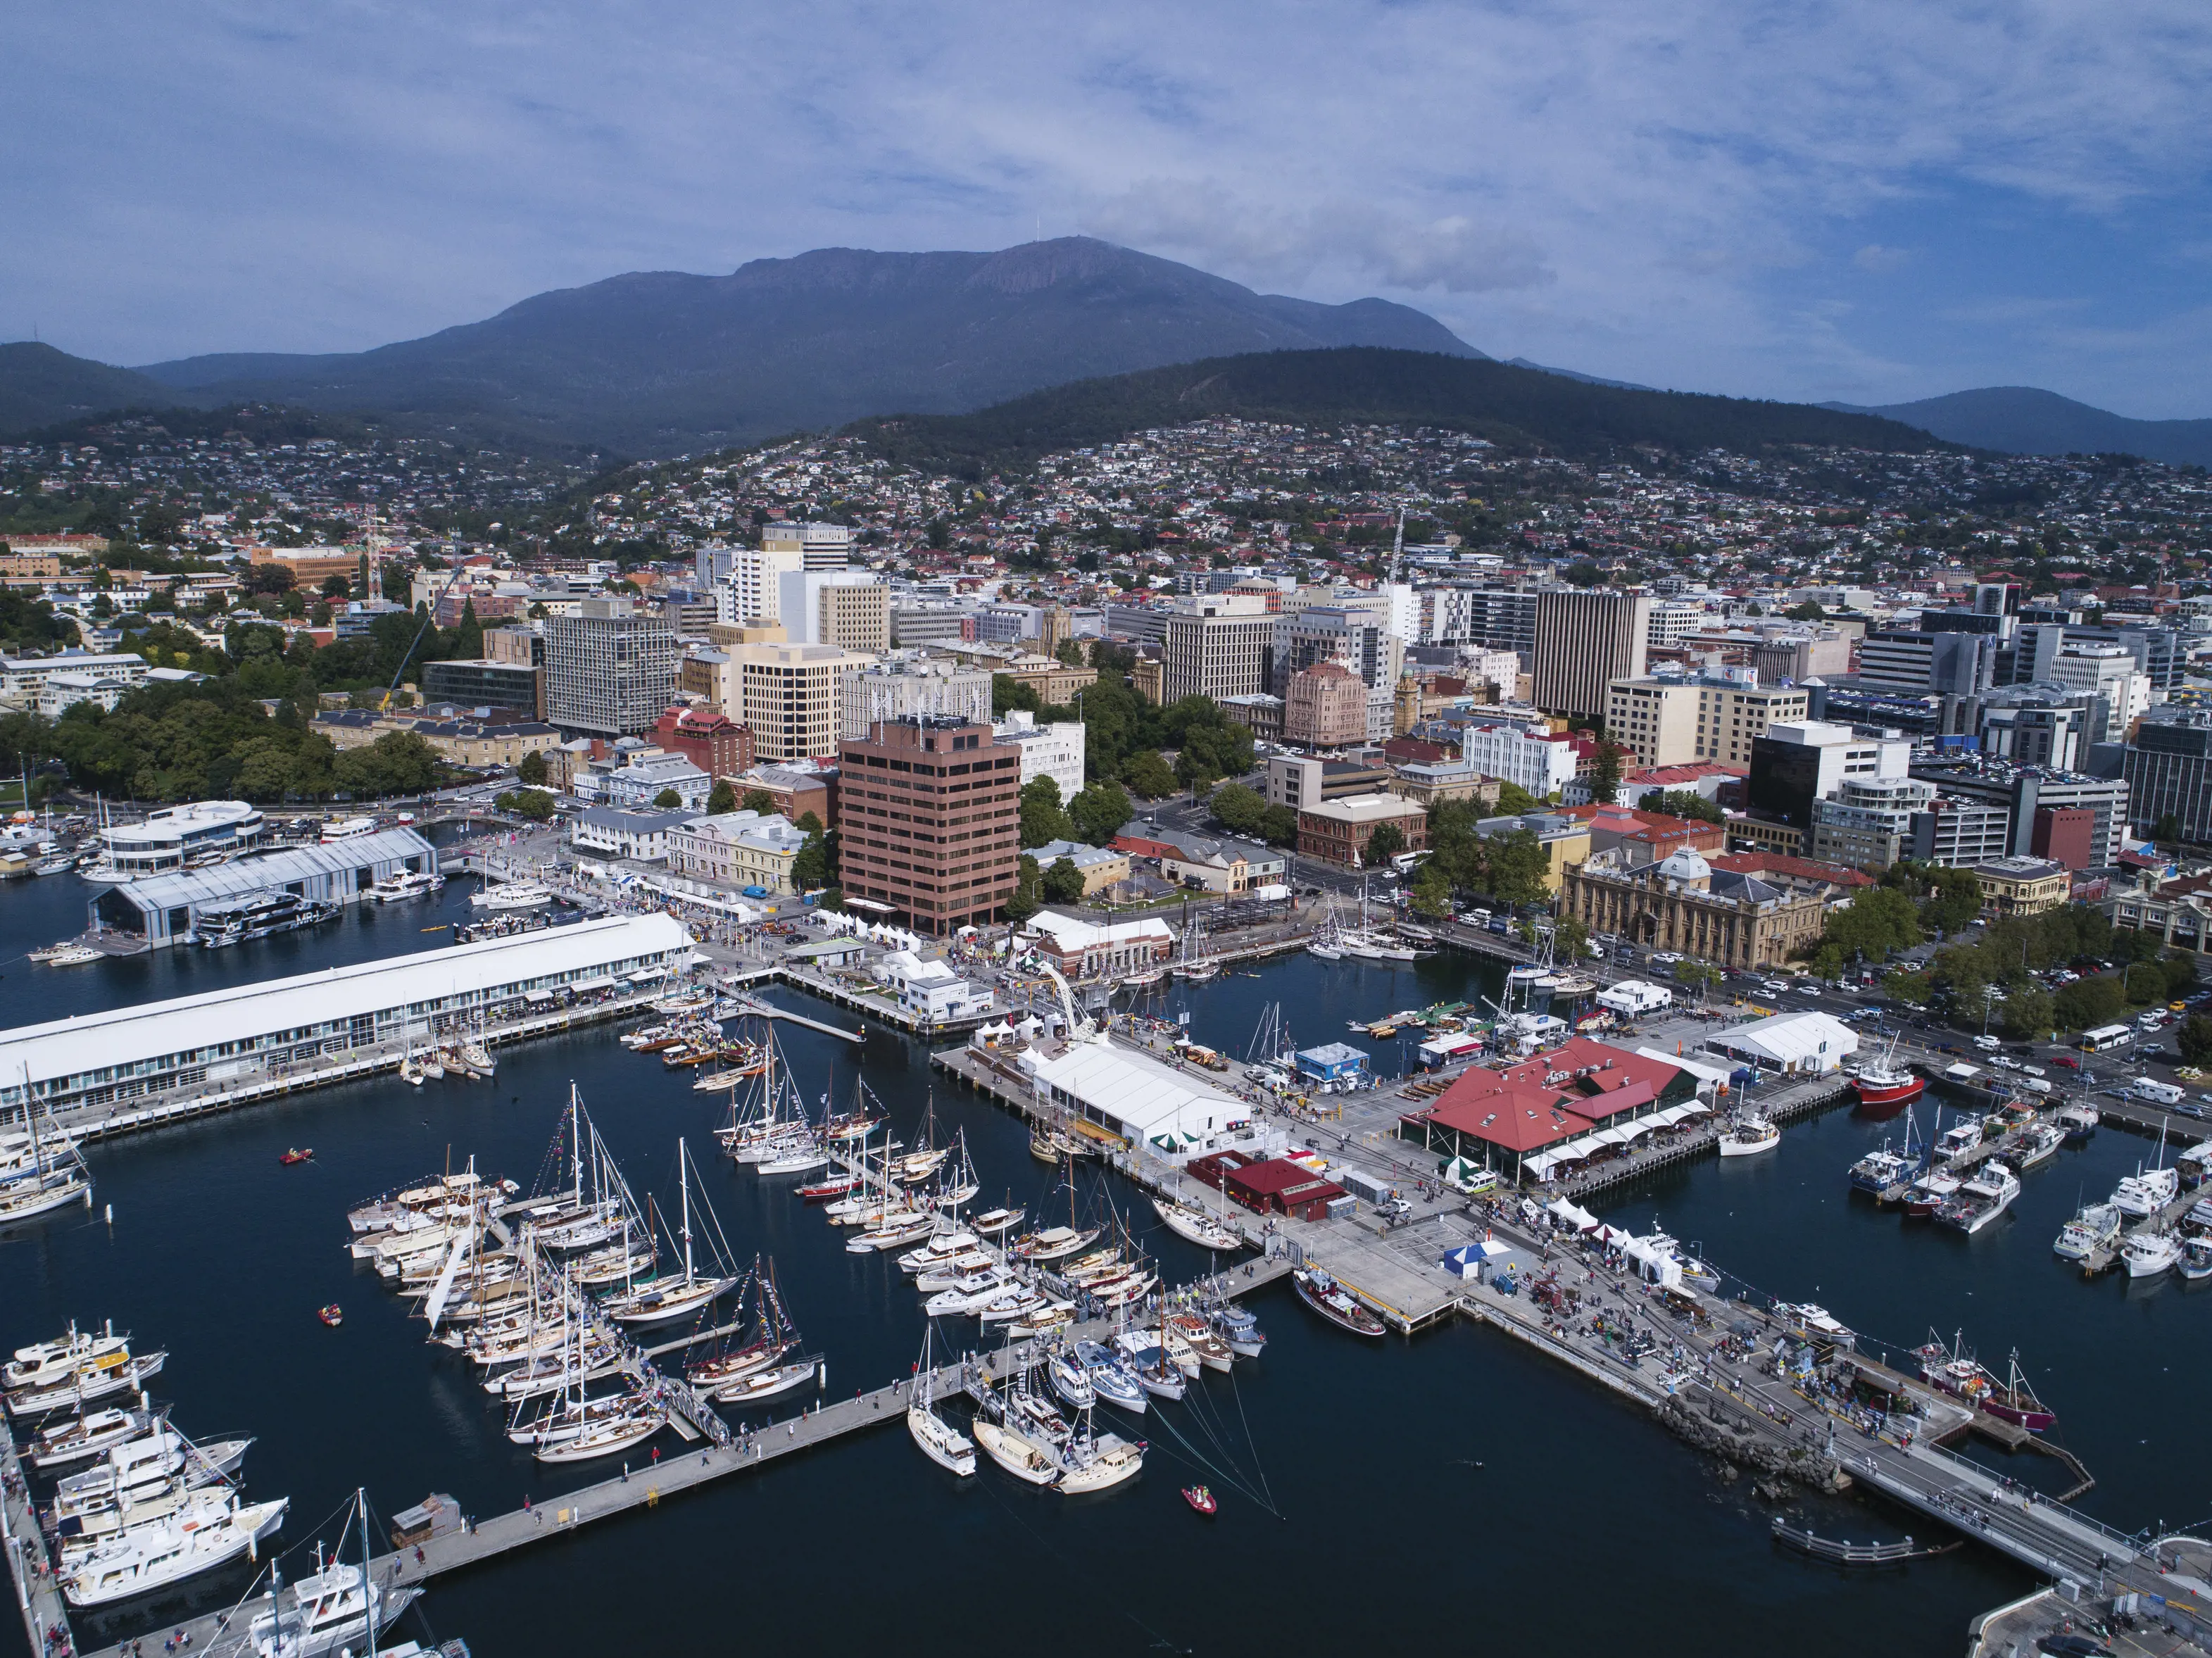 Aerial view of Hobart's marina, skyline and mountains in the background.